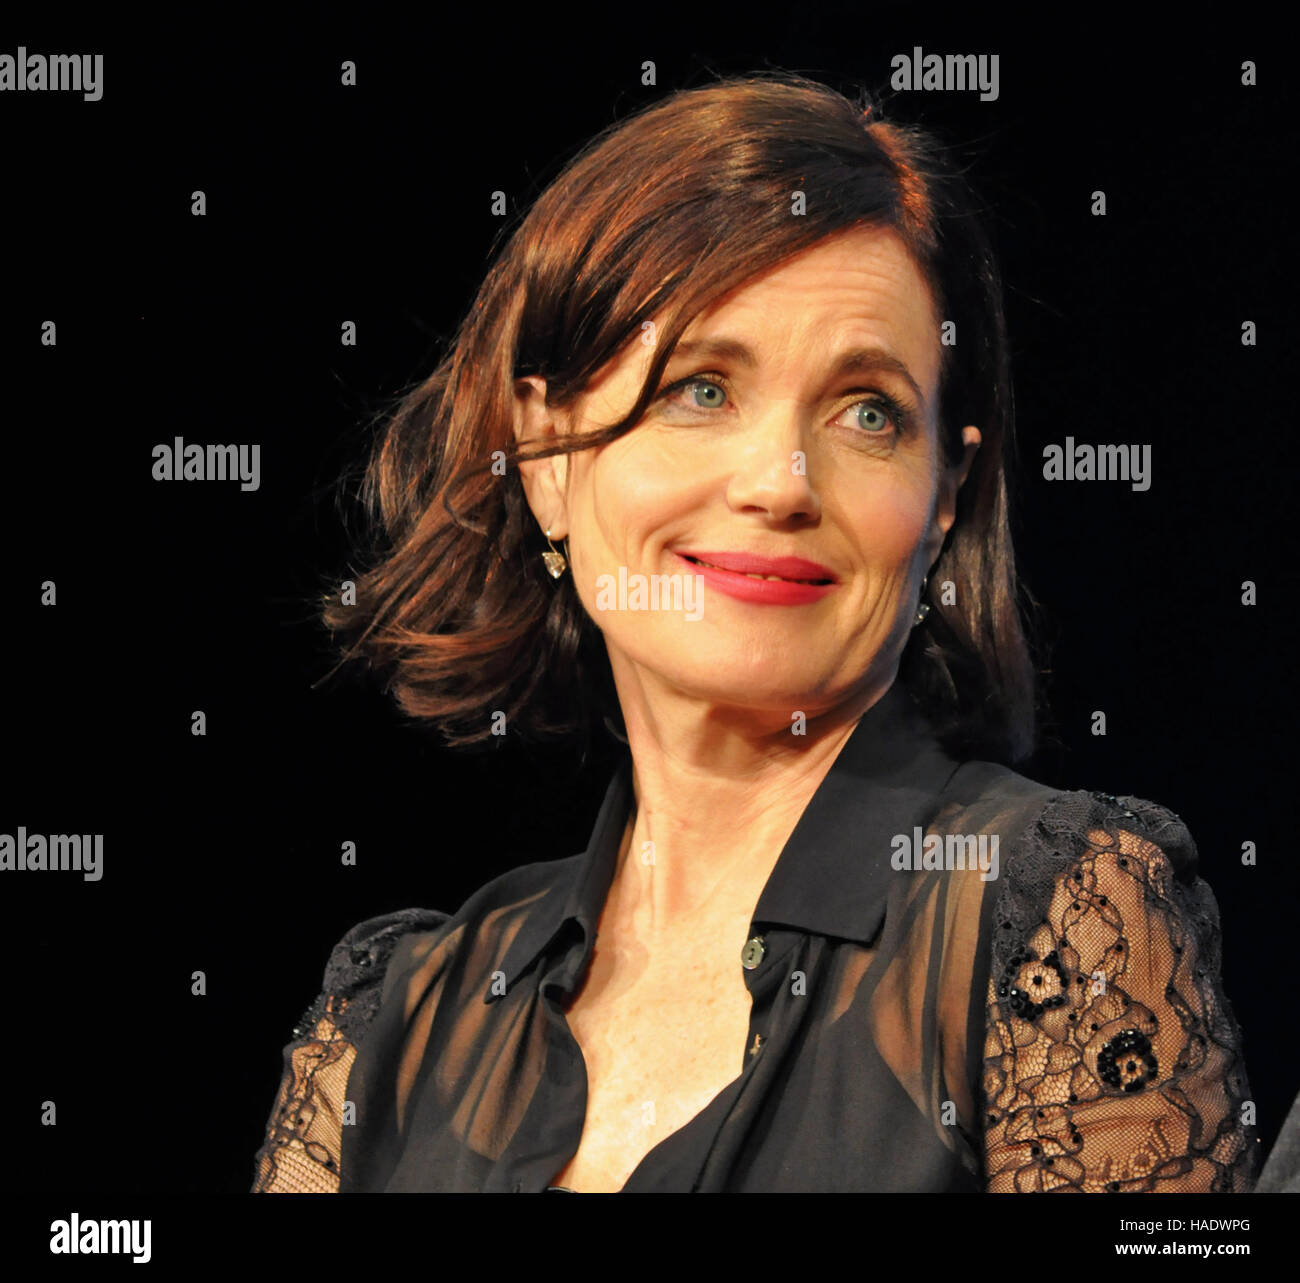 NY, NY. December 8 2015. Elizabeth McGovern (Lady Grantham) at the 'Downtown Abbey' PBS panel. © Veronica Bruno/Alamy Stock Photo